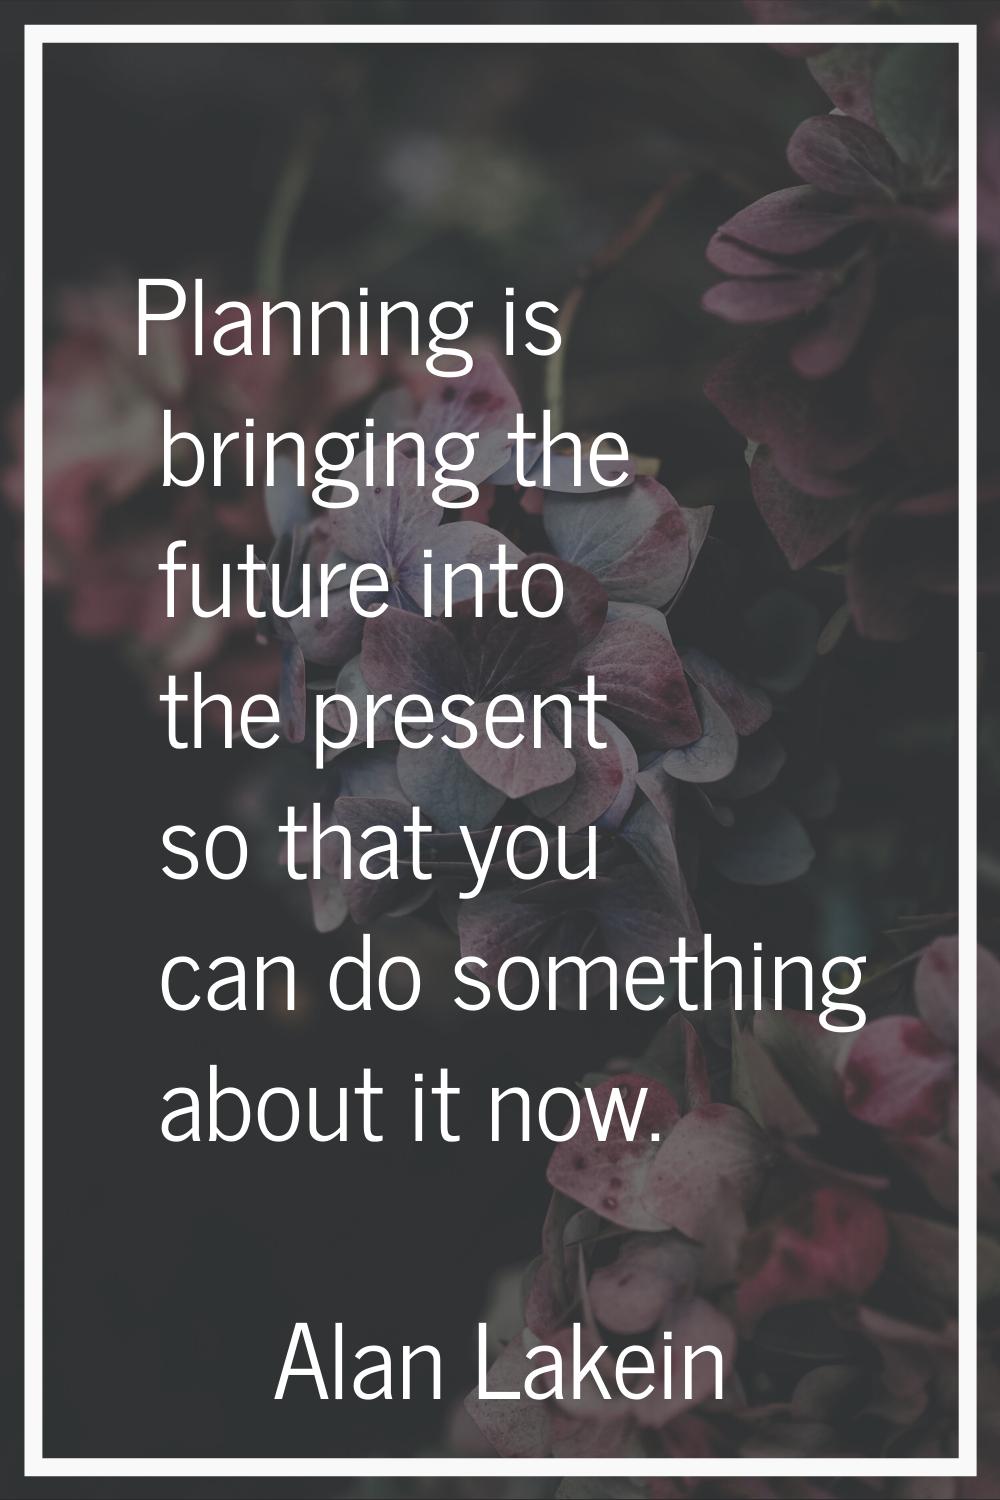 Planning is bringing the future into the present so that you can do something about it now.